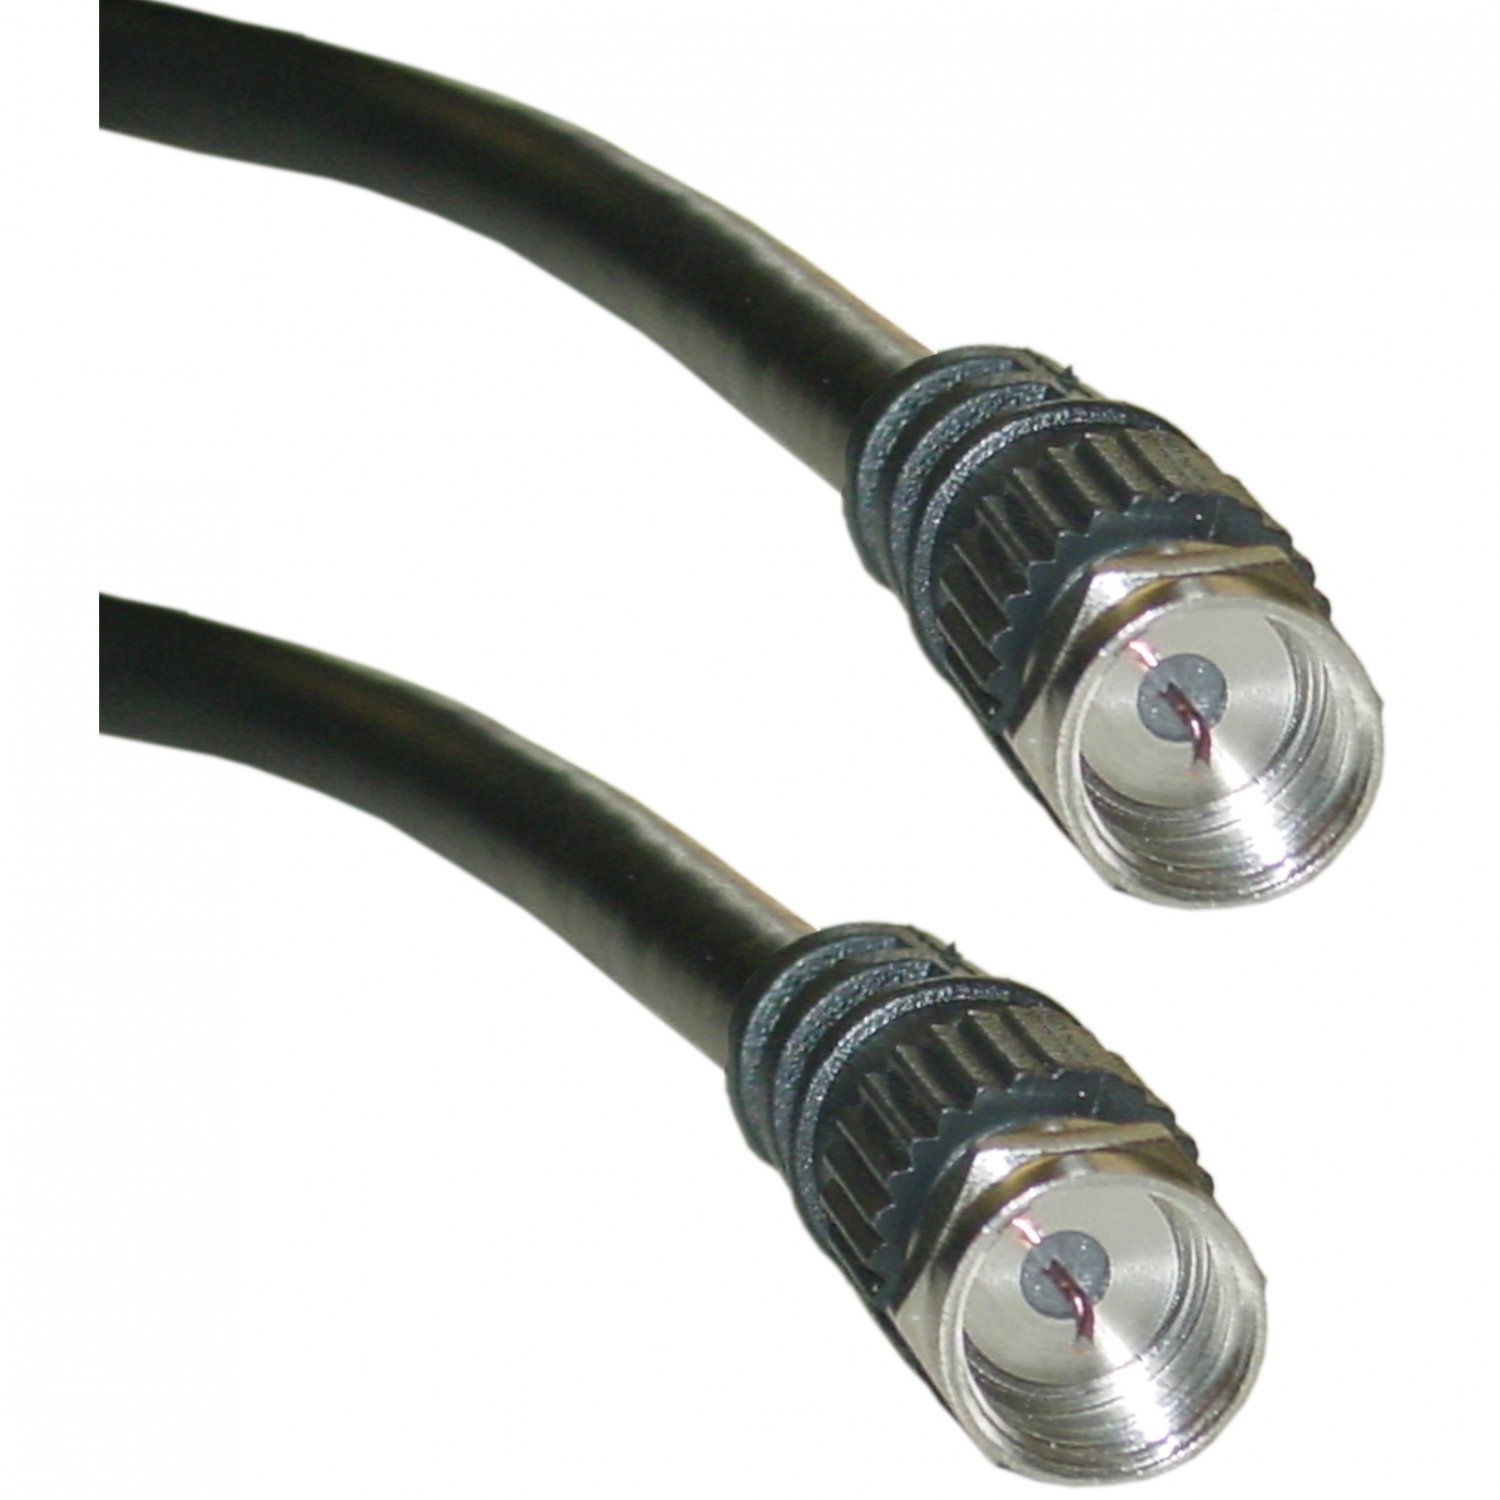 F-pin RG59 Coaxial Cable, Black, F-pin Male, 12 foot